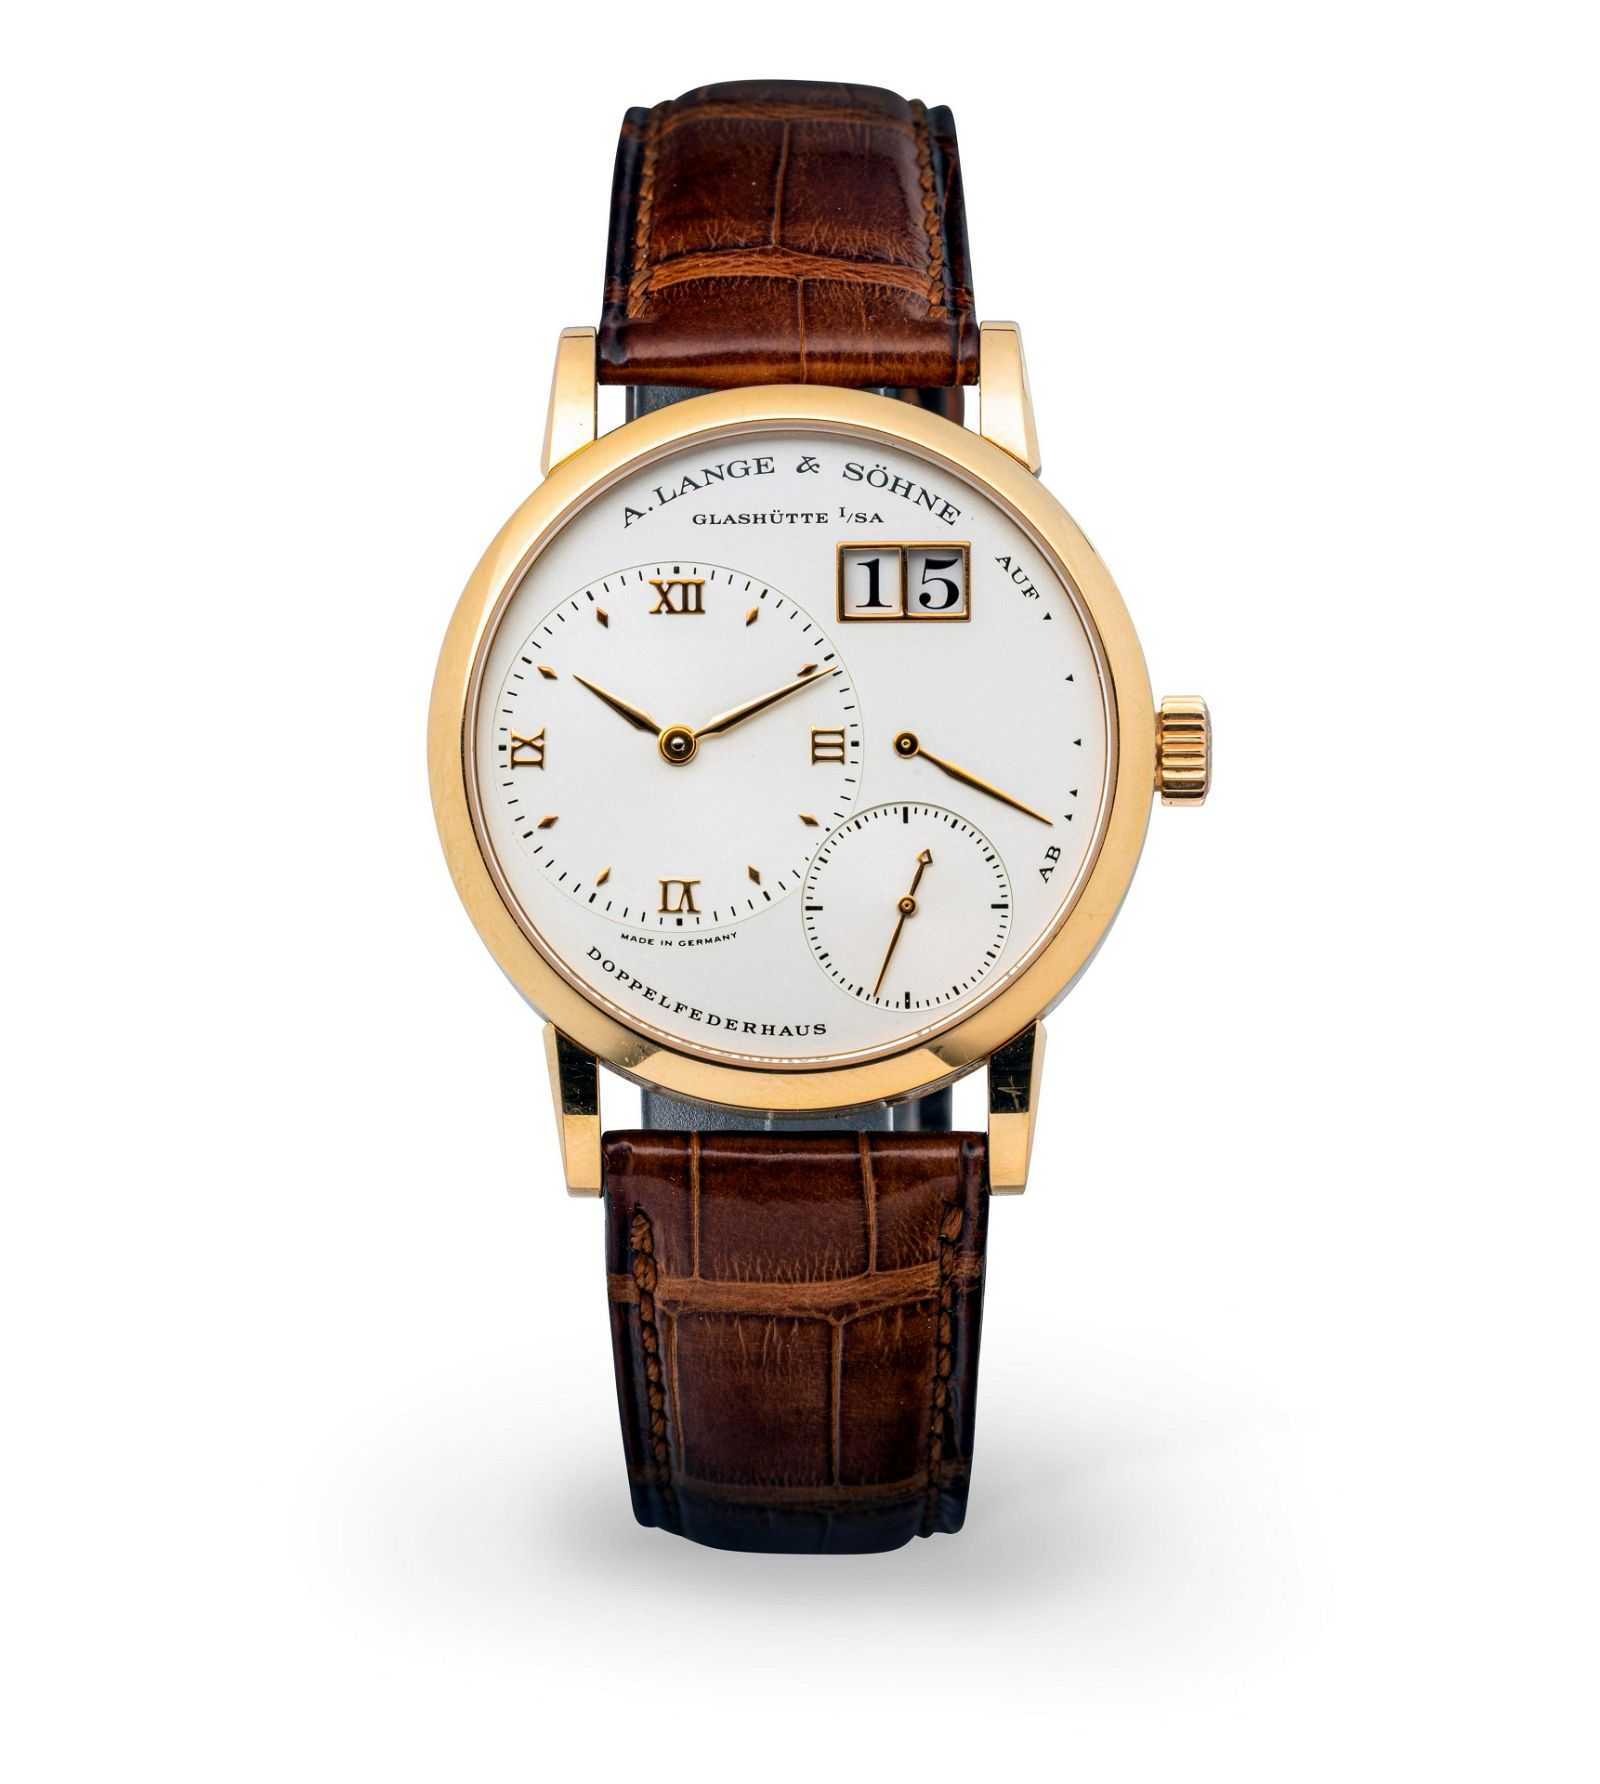 A circa-2000 Little Lange 1, designed for the women’s watch market by A. Lange & Söhne, went for €20,000 ($21,410) in June 2023. Image courtesy of Cambi Casa D’Aste and LiveAuctioneers.